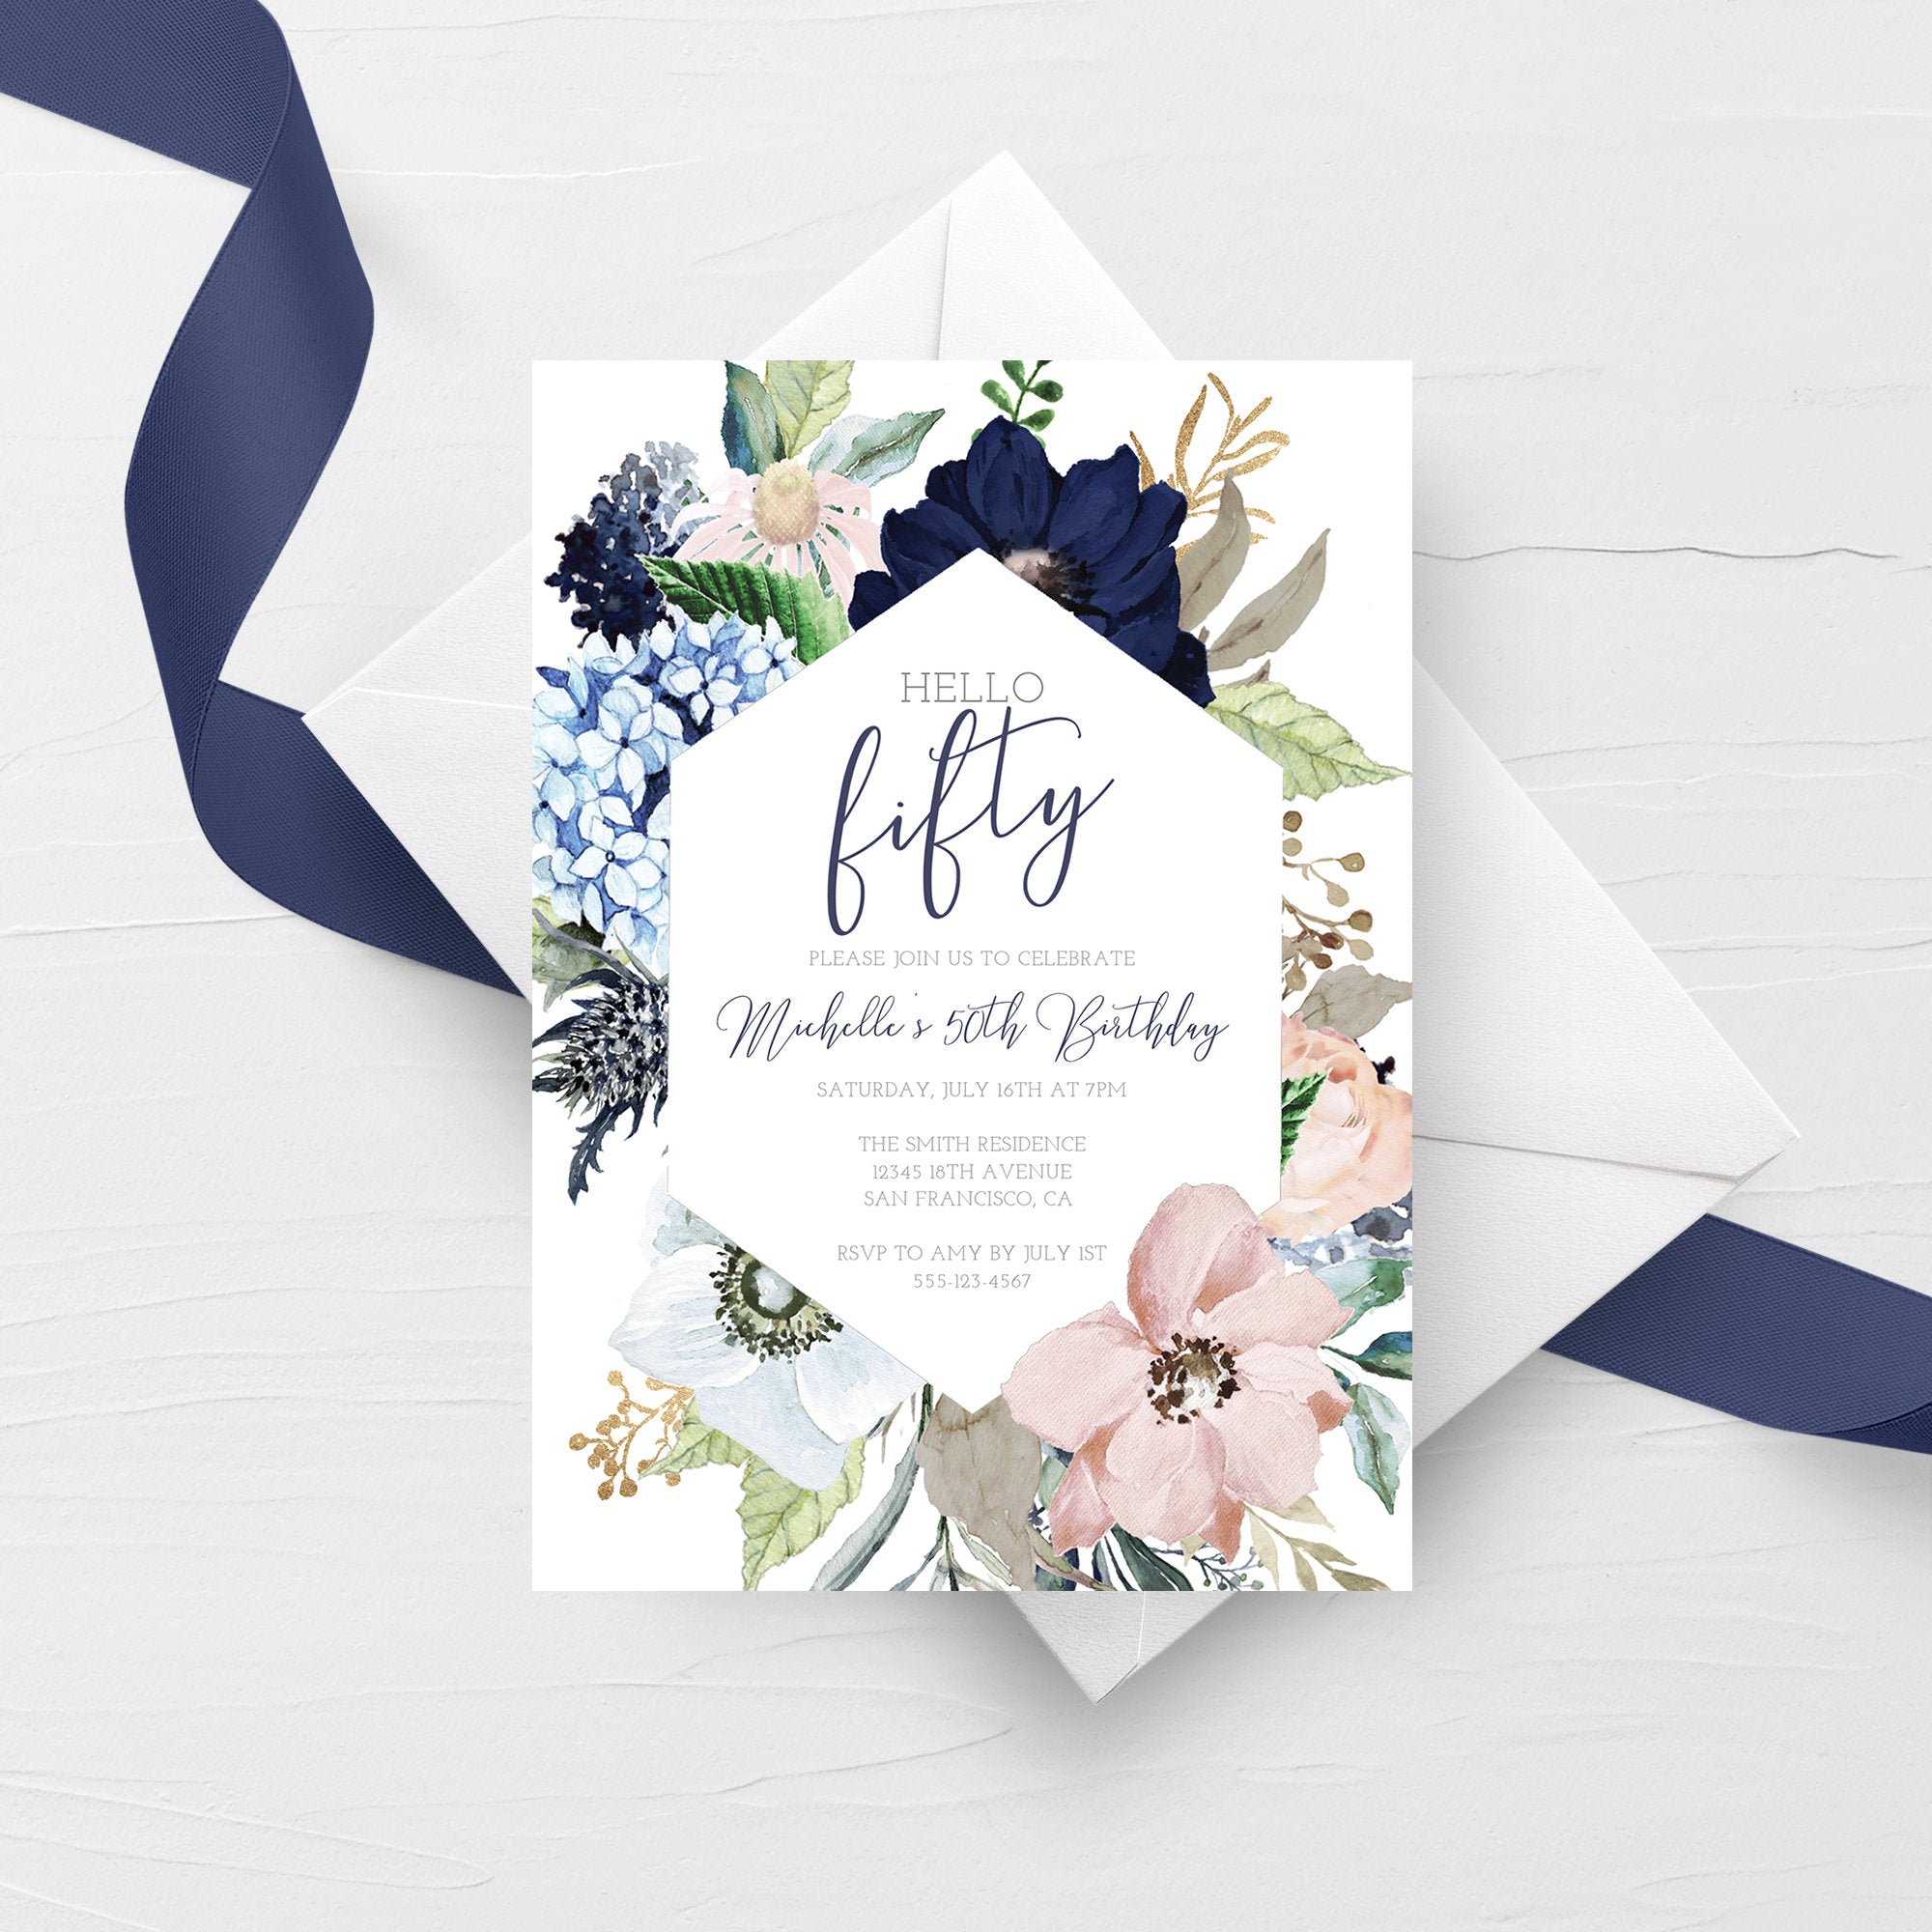 50th Birthday Invitation For Women, Printable 50th Birthday Party Invitation, Navy Blush Floral 50th Birthday Invite, INSTANT DOWNLOAD MB100